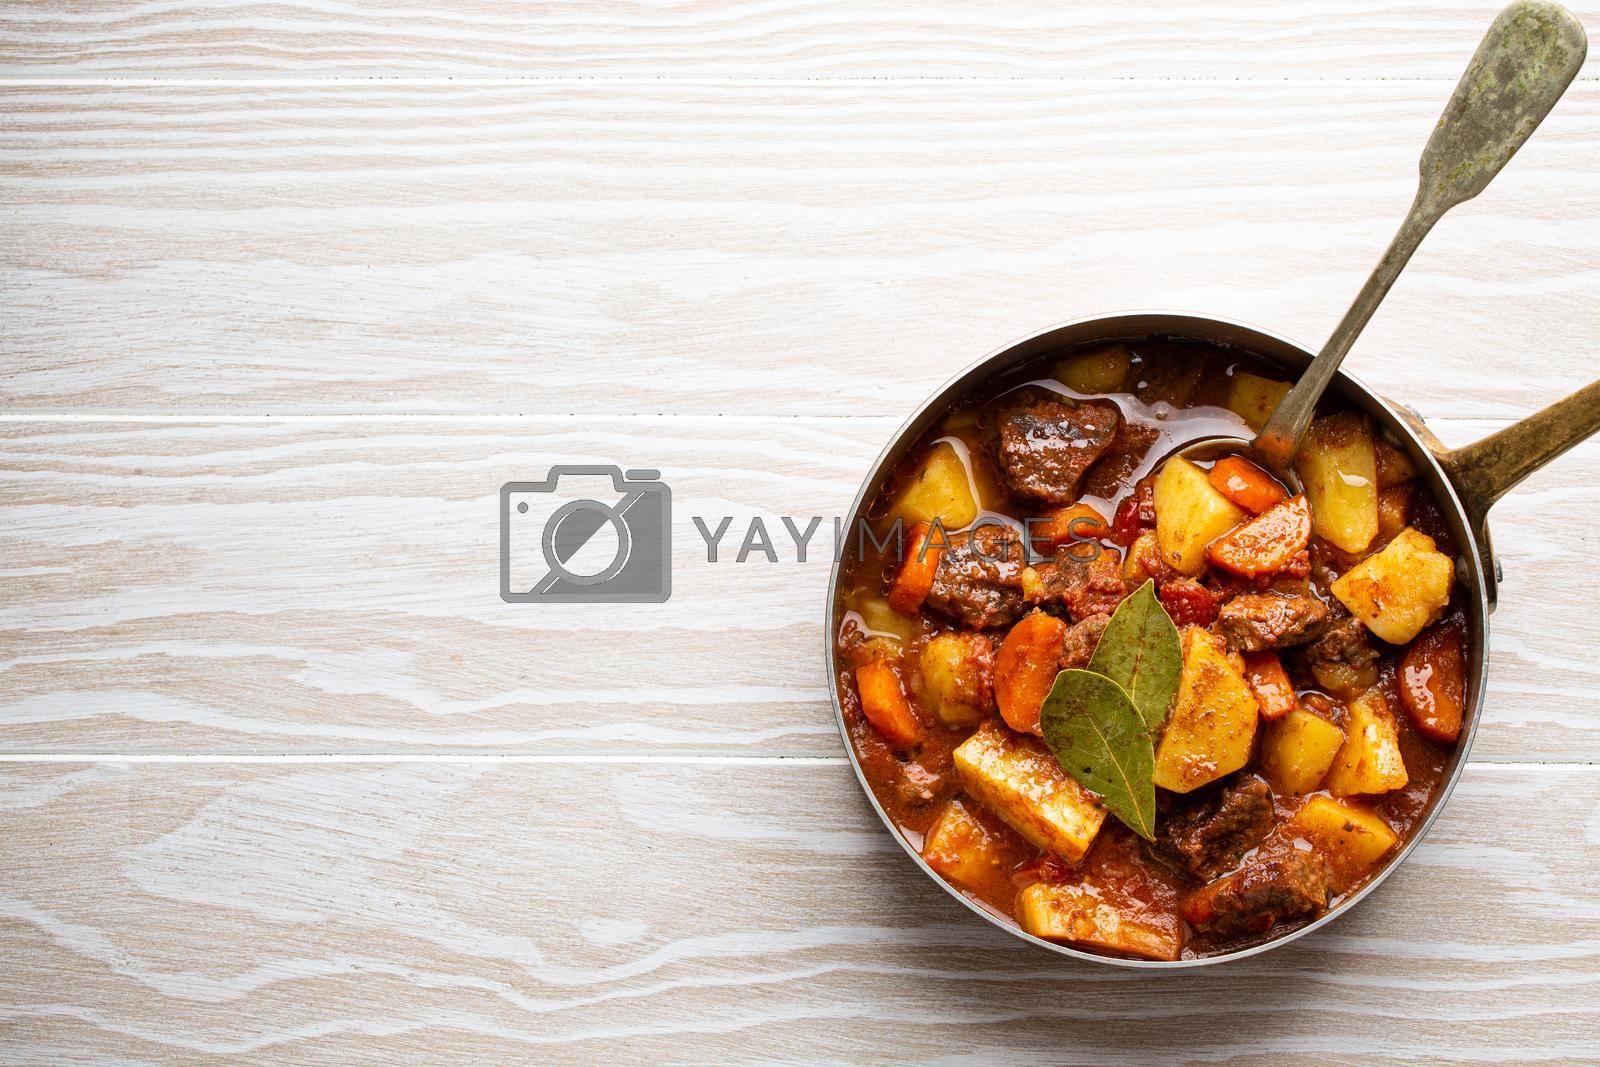 Royalty free image of Meat vegetables stew by its_al_dente